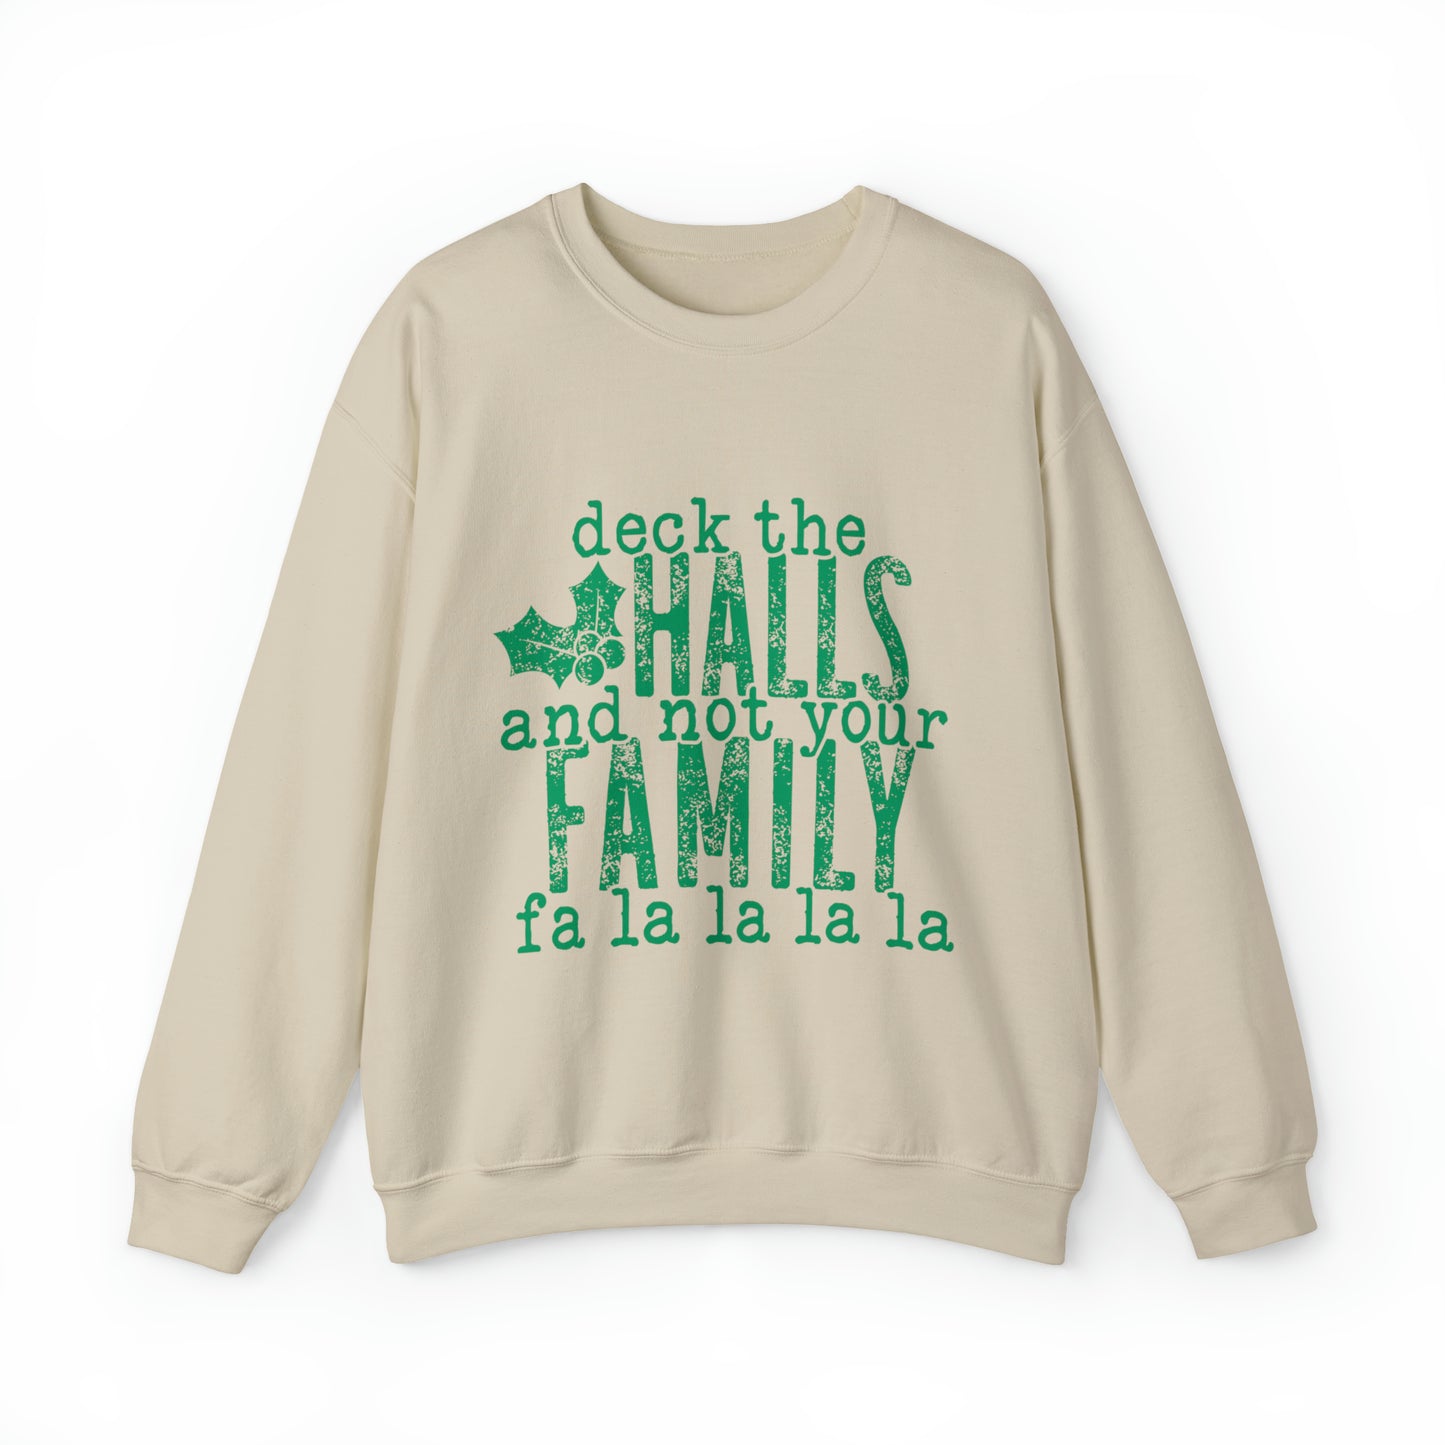 Deck the Halls Family Unisex Adult Funny Christmas Shirt with Green